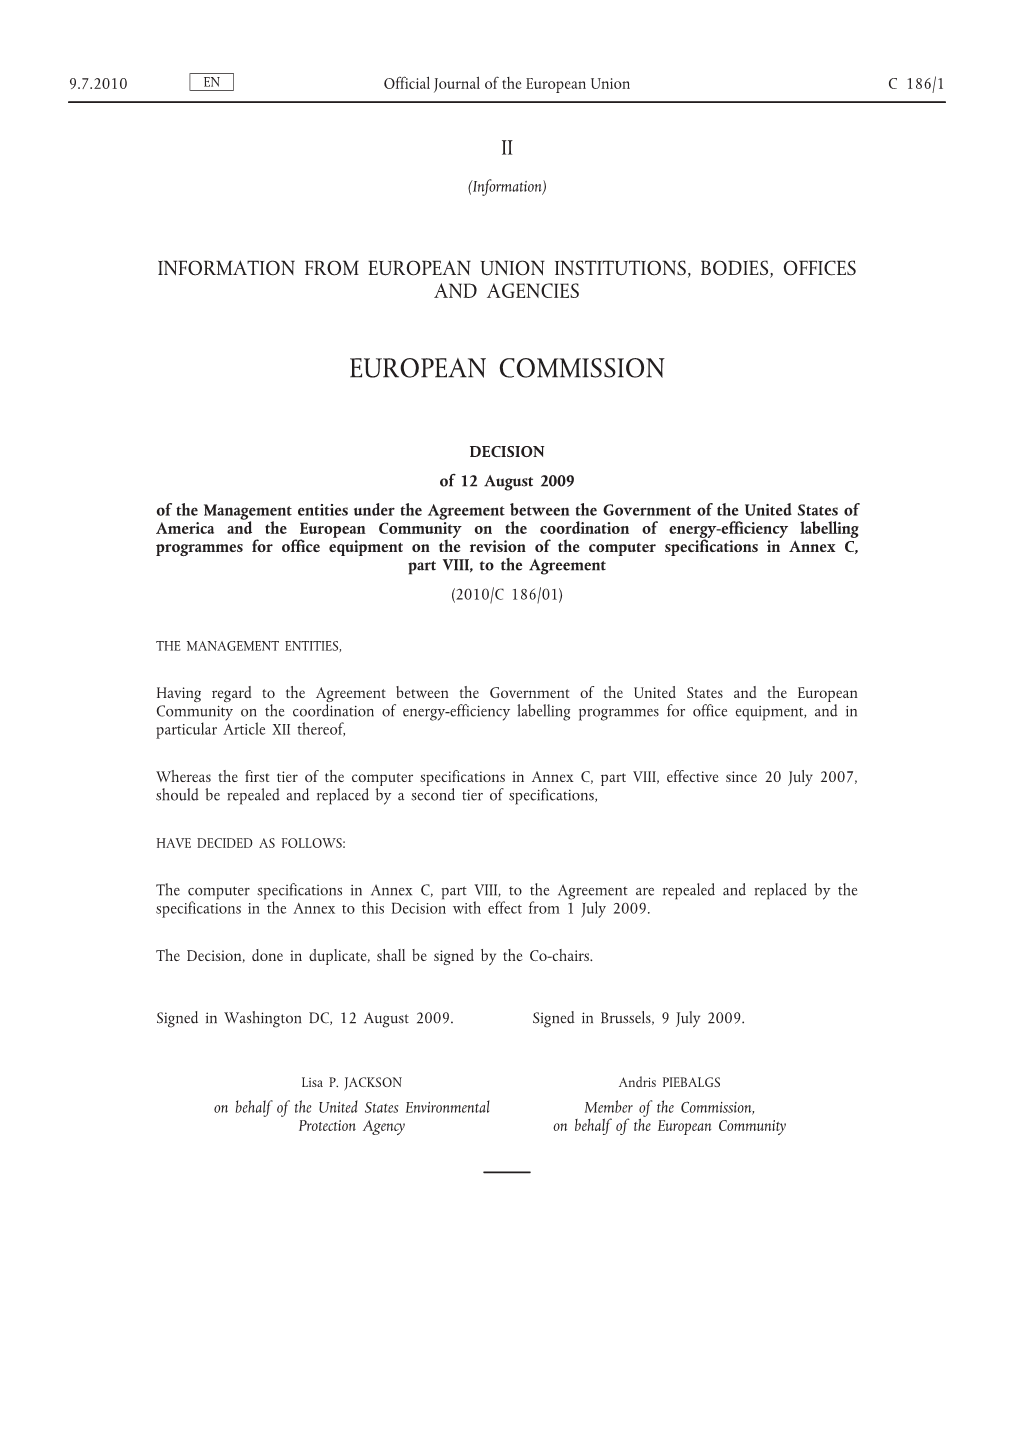 Decision of 12 August 2009 of the Management Entities Under The